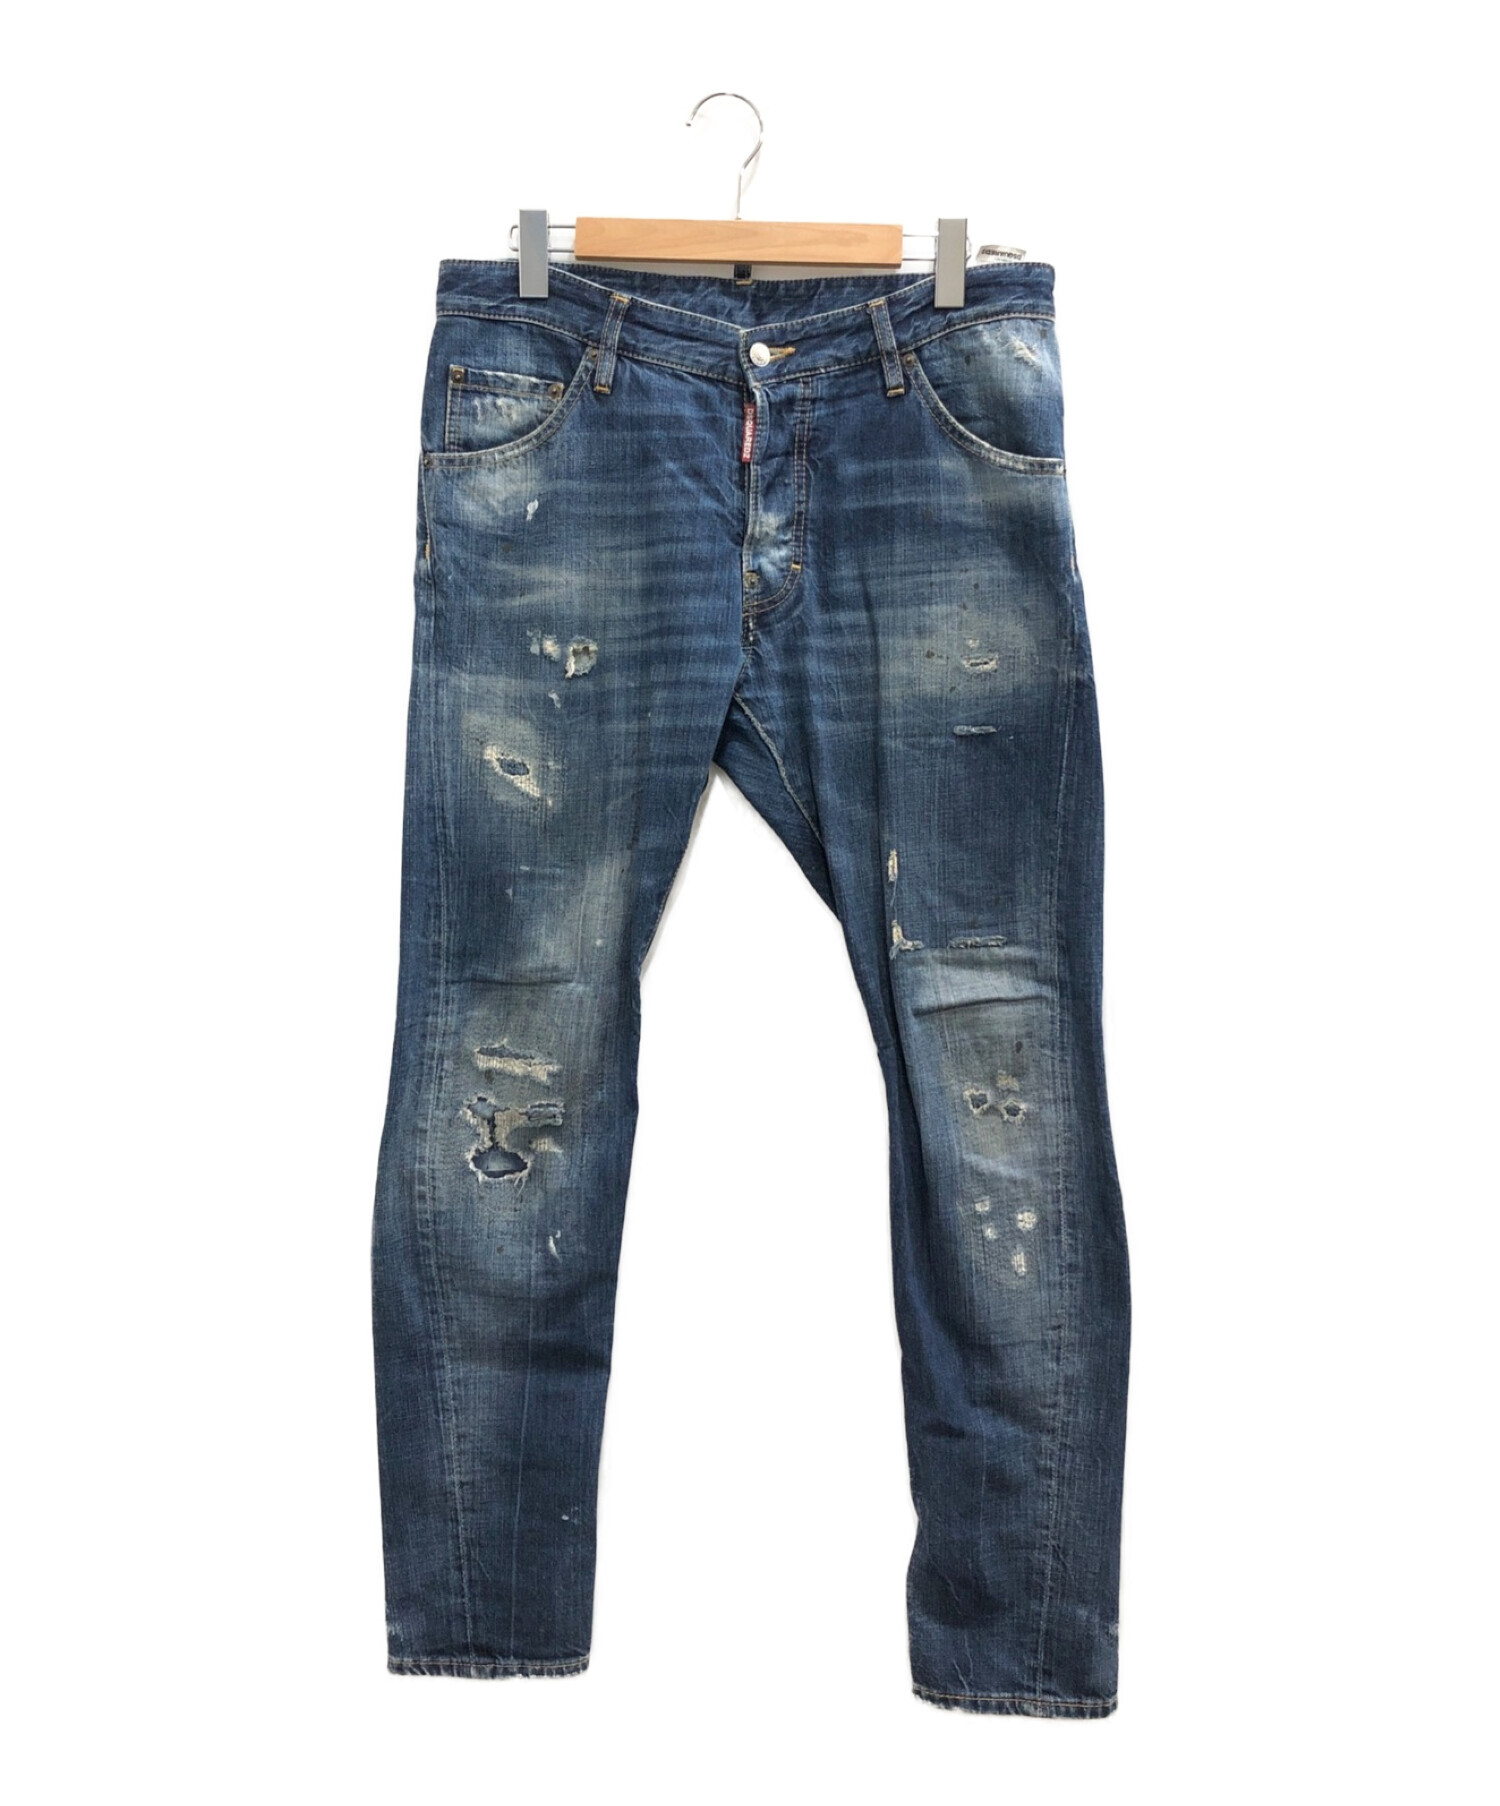 DSQUARED2 ディースクエアード 18AW CLASSIC KENNY TWIST JEAN